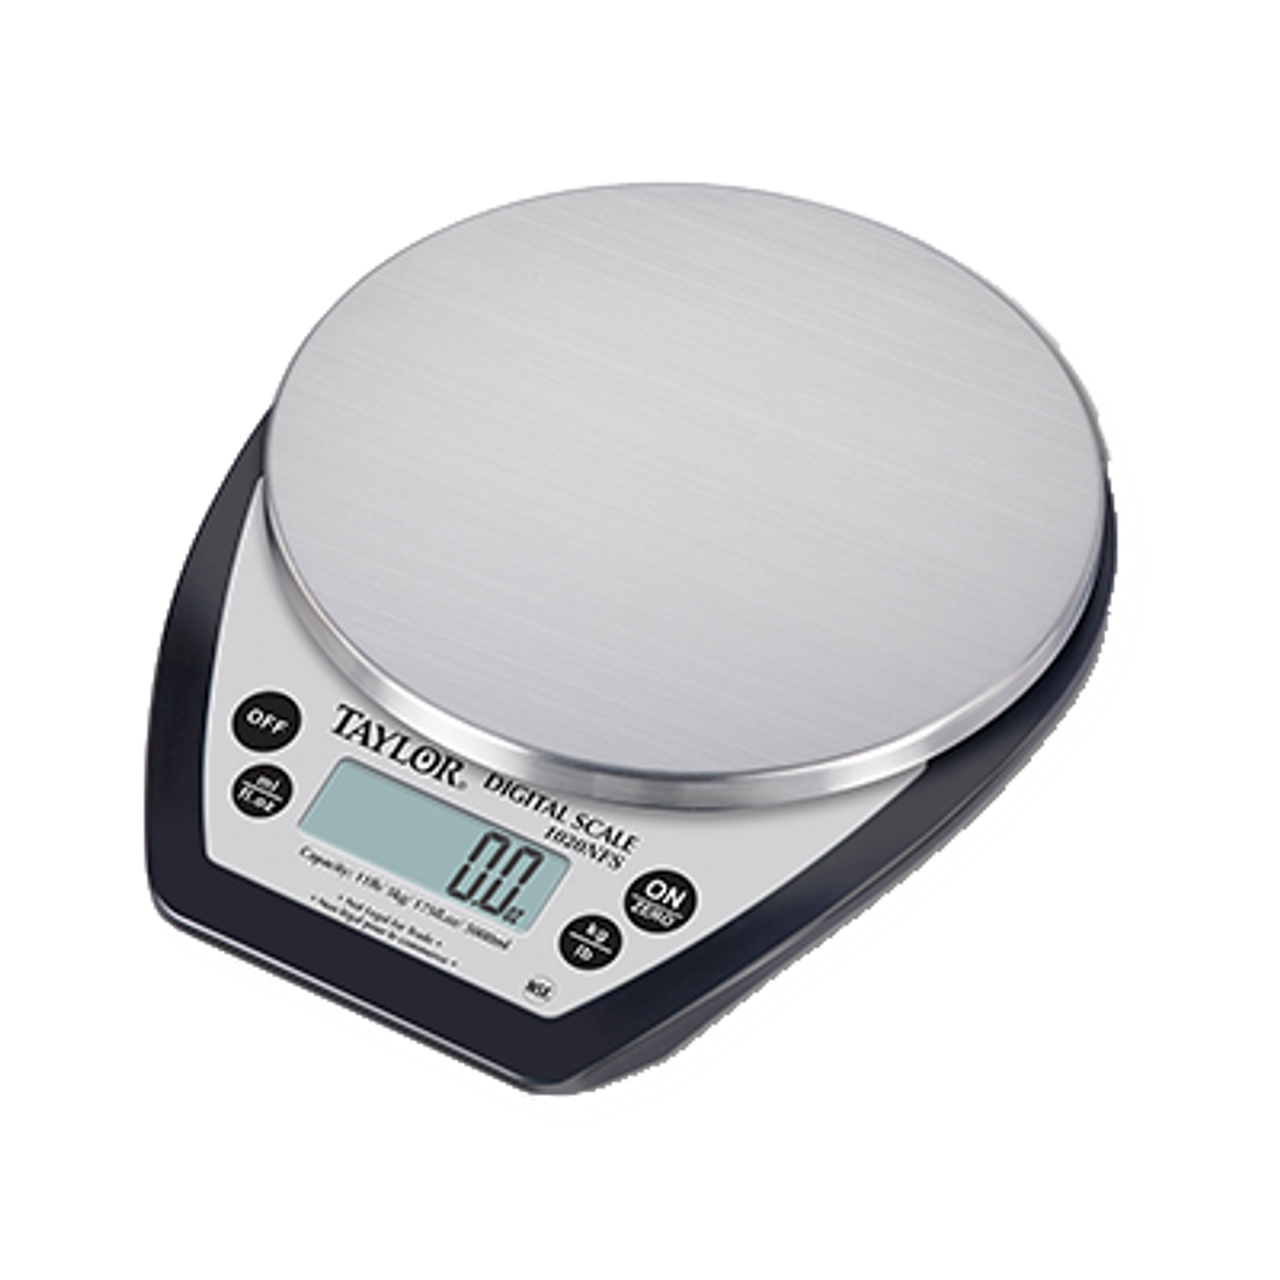 Taylor 3817R Compact Kitchen Scale